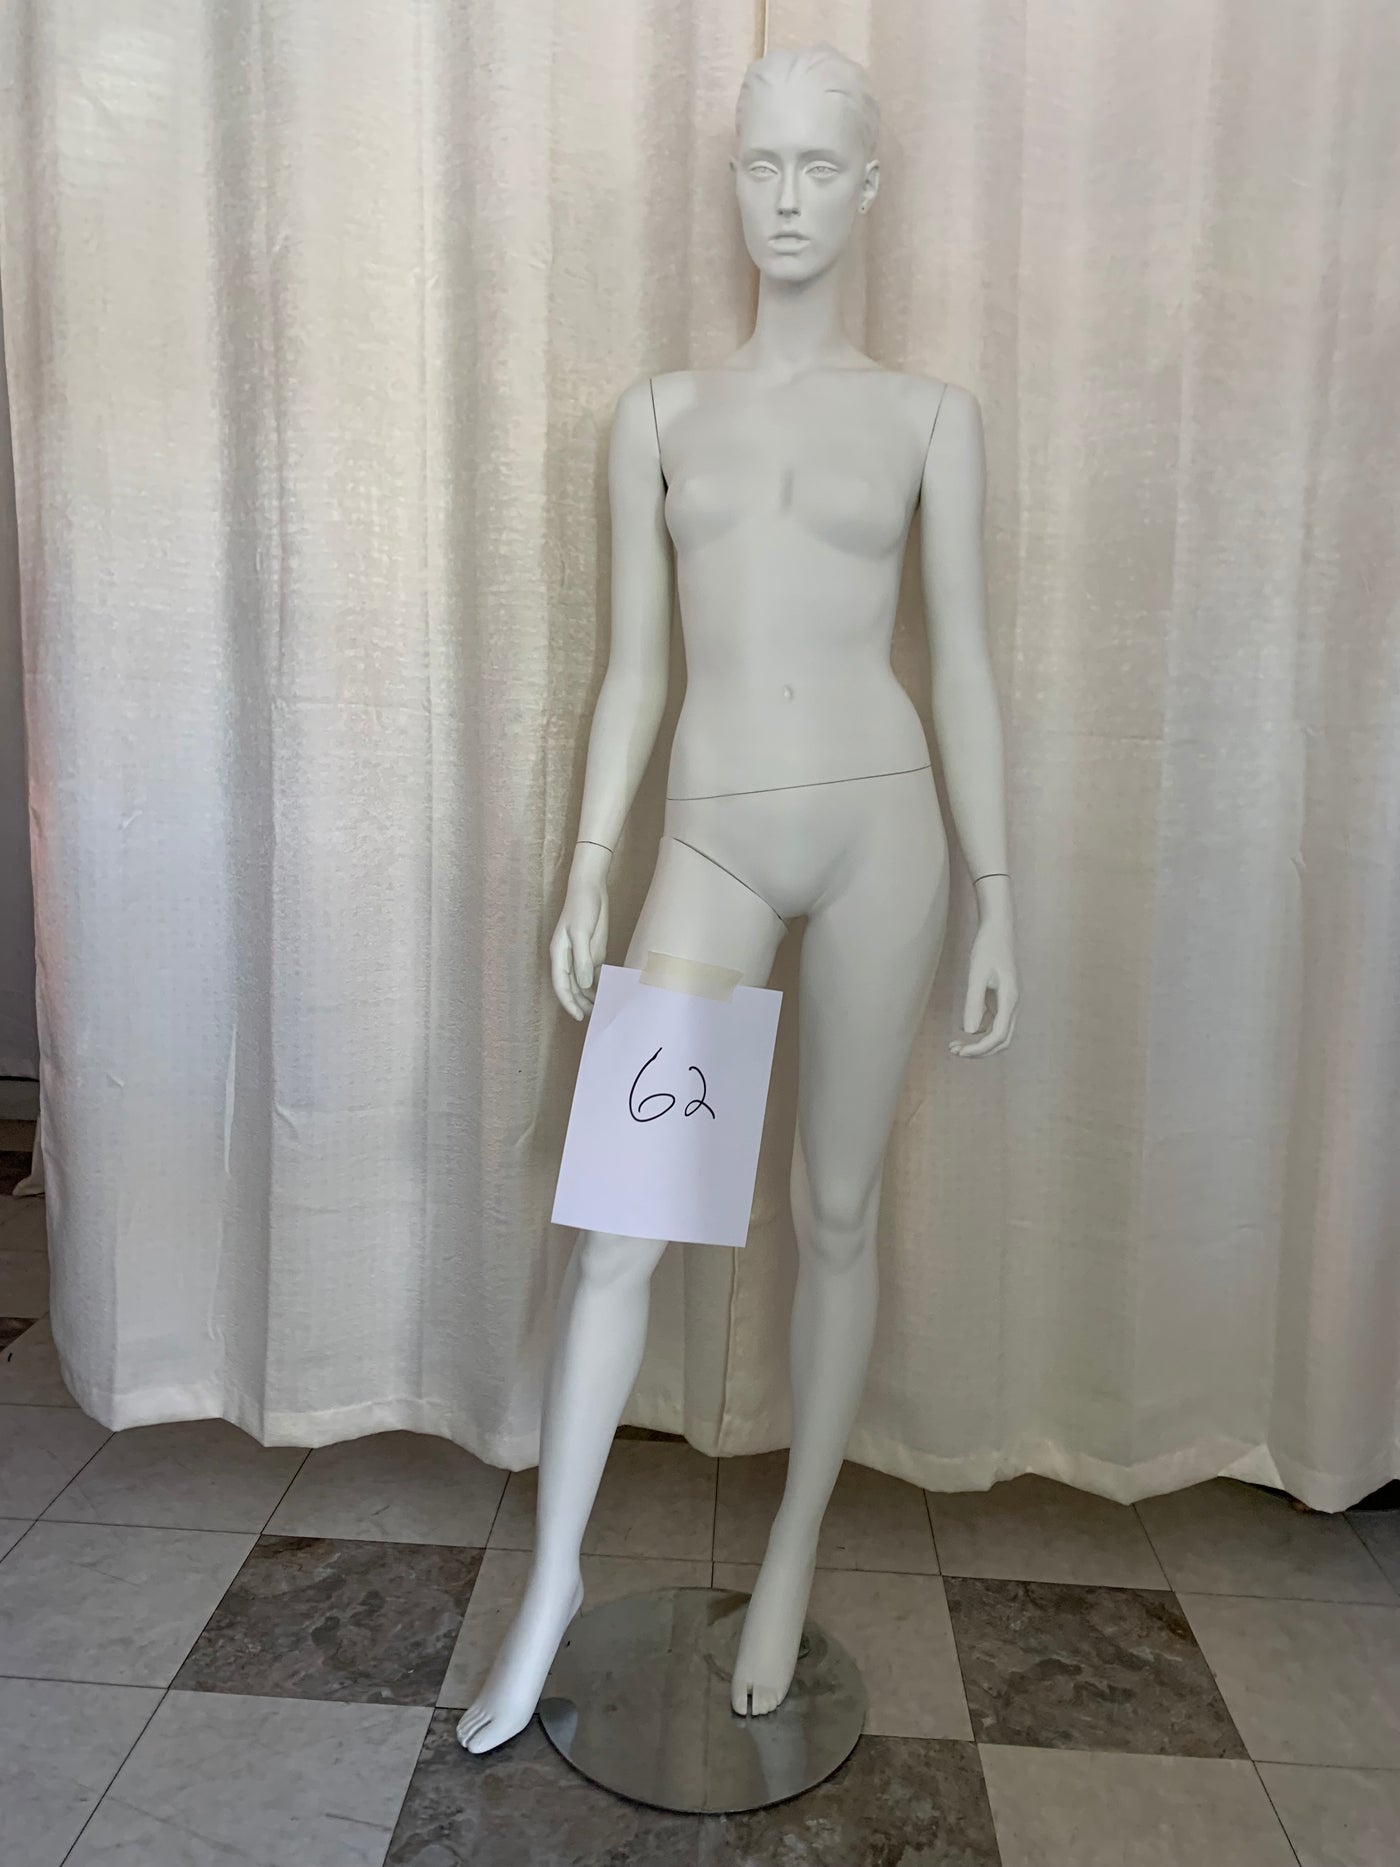 Used Female  Adel Rootstein Mannequin  #62 -Girl Thing